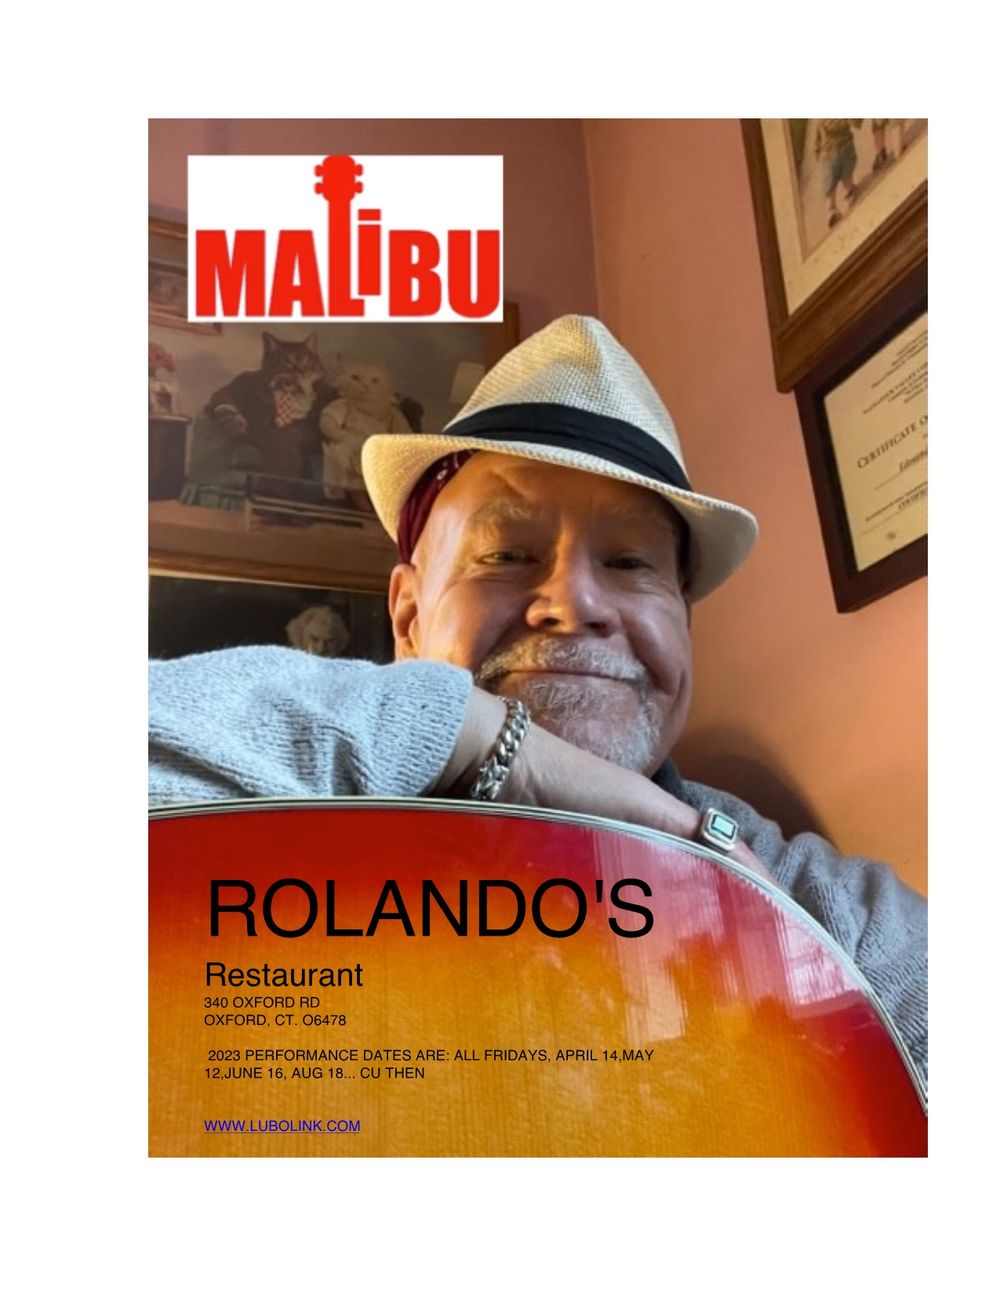 Rolondo's has awesome food and great service